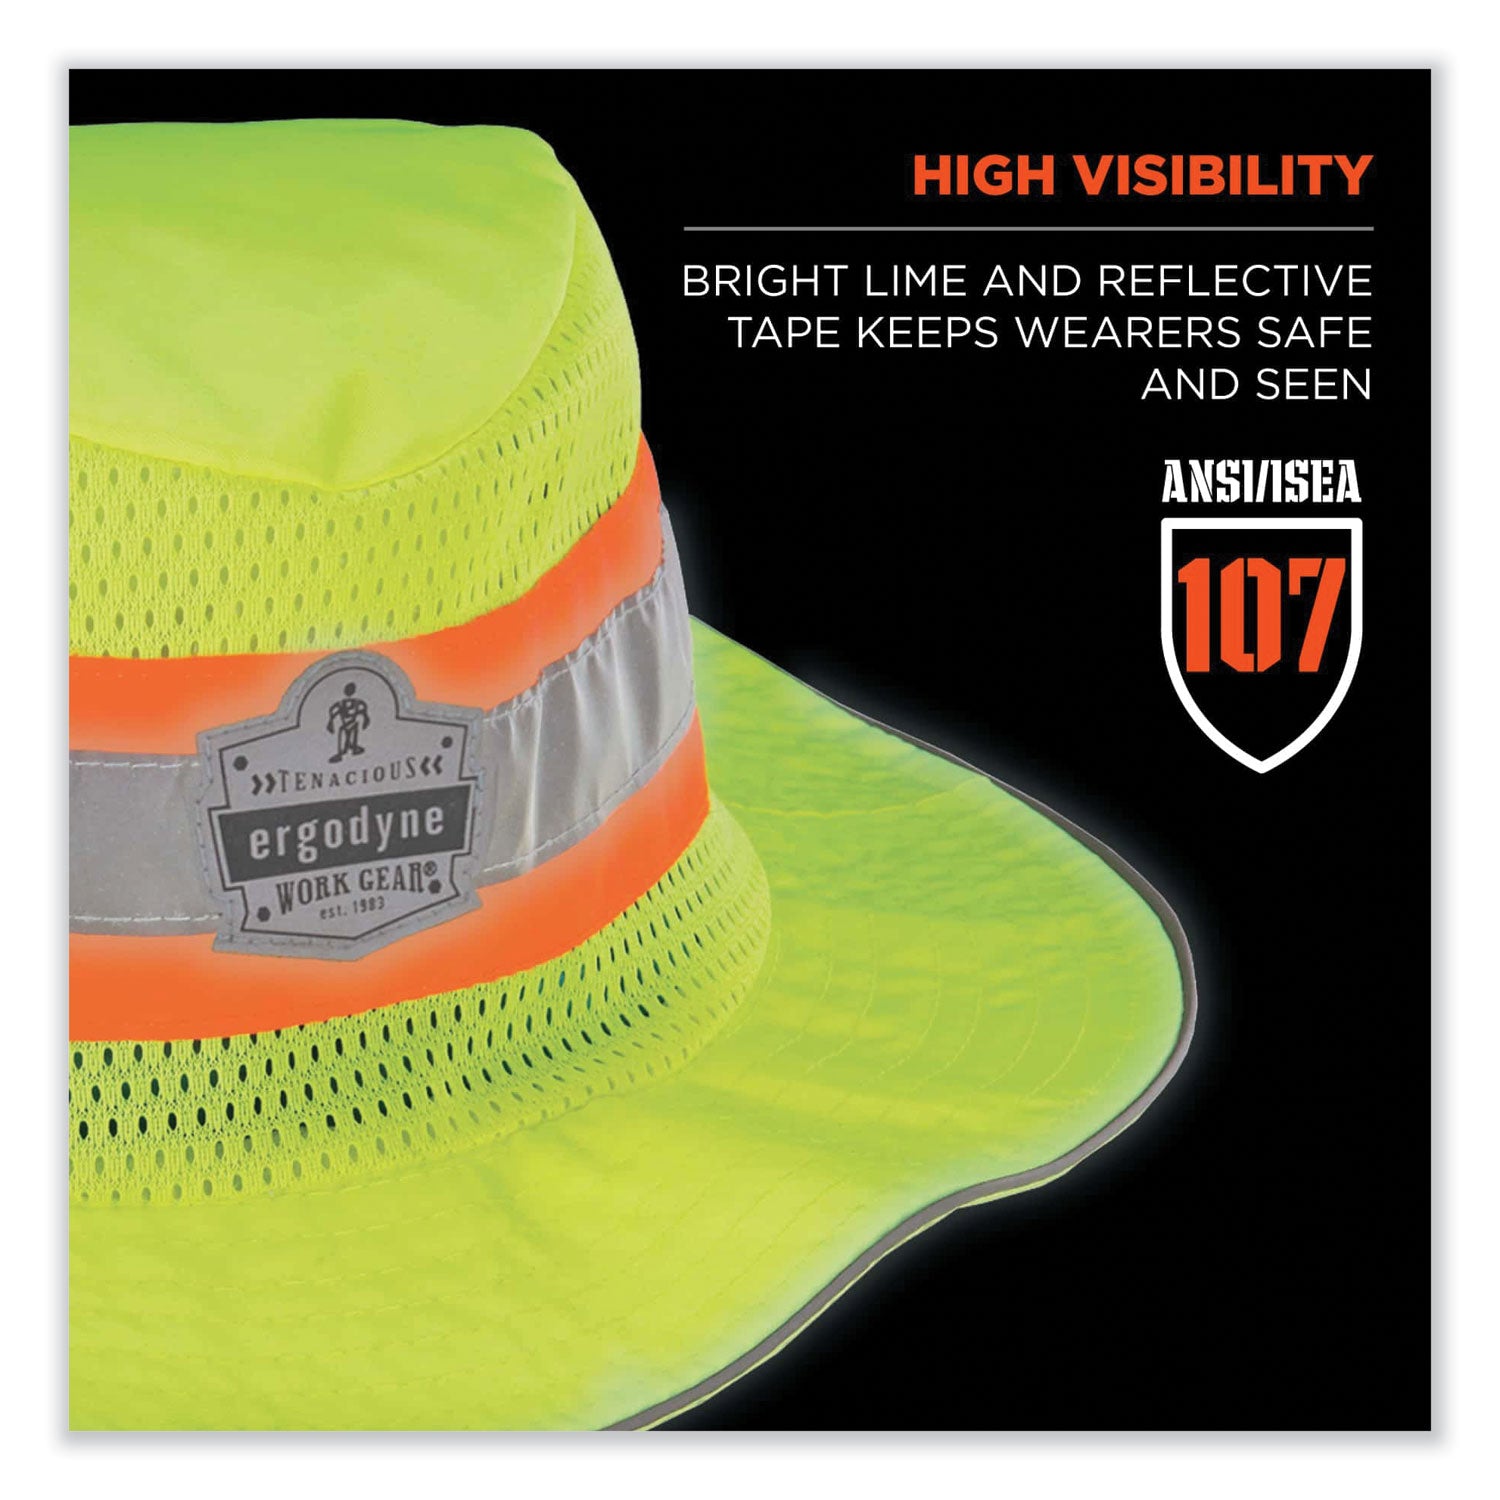 chill-its-8935ct-hi-vis-pva-ranger-sun-hat-large-x-large-lime-ships-in-1-3-business-days_ego12591 - 4